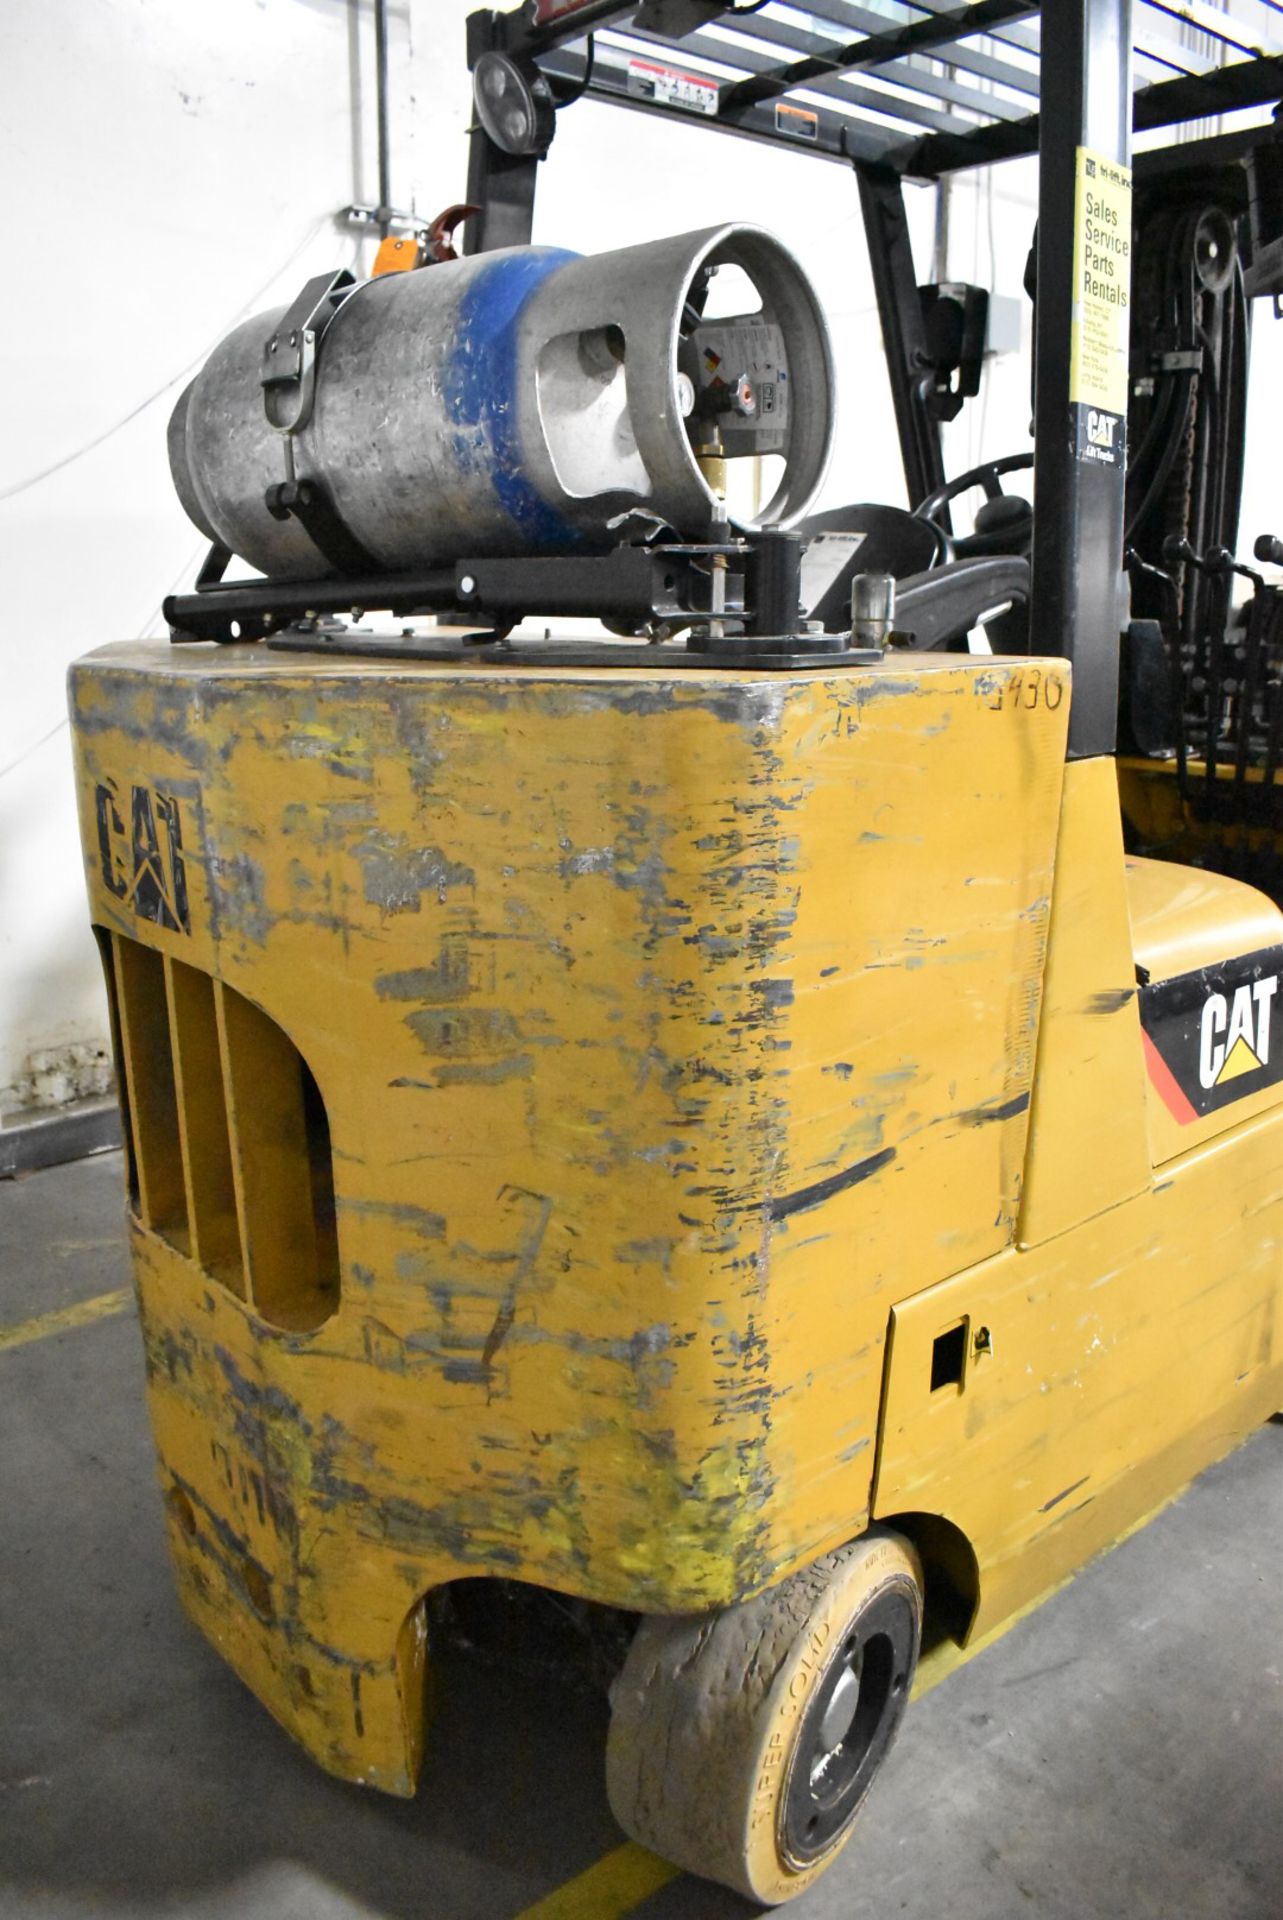 CATERPILLAR (2013) GC55KPRSTR 7,000 LBS. CAPACITY LPG FORKLIFT WITH 172" MAX VERTICAL REACH, 3-STAGE - Image 4 of 10